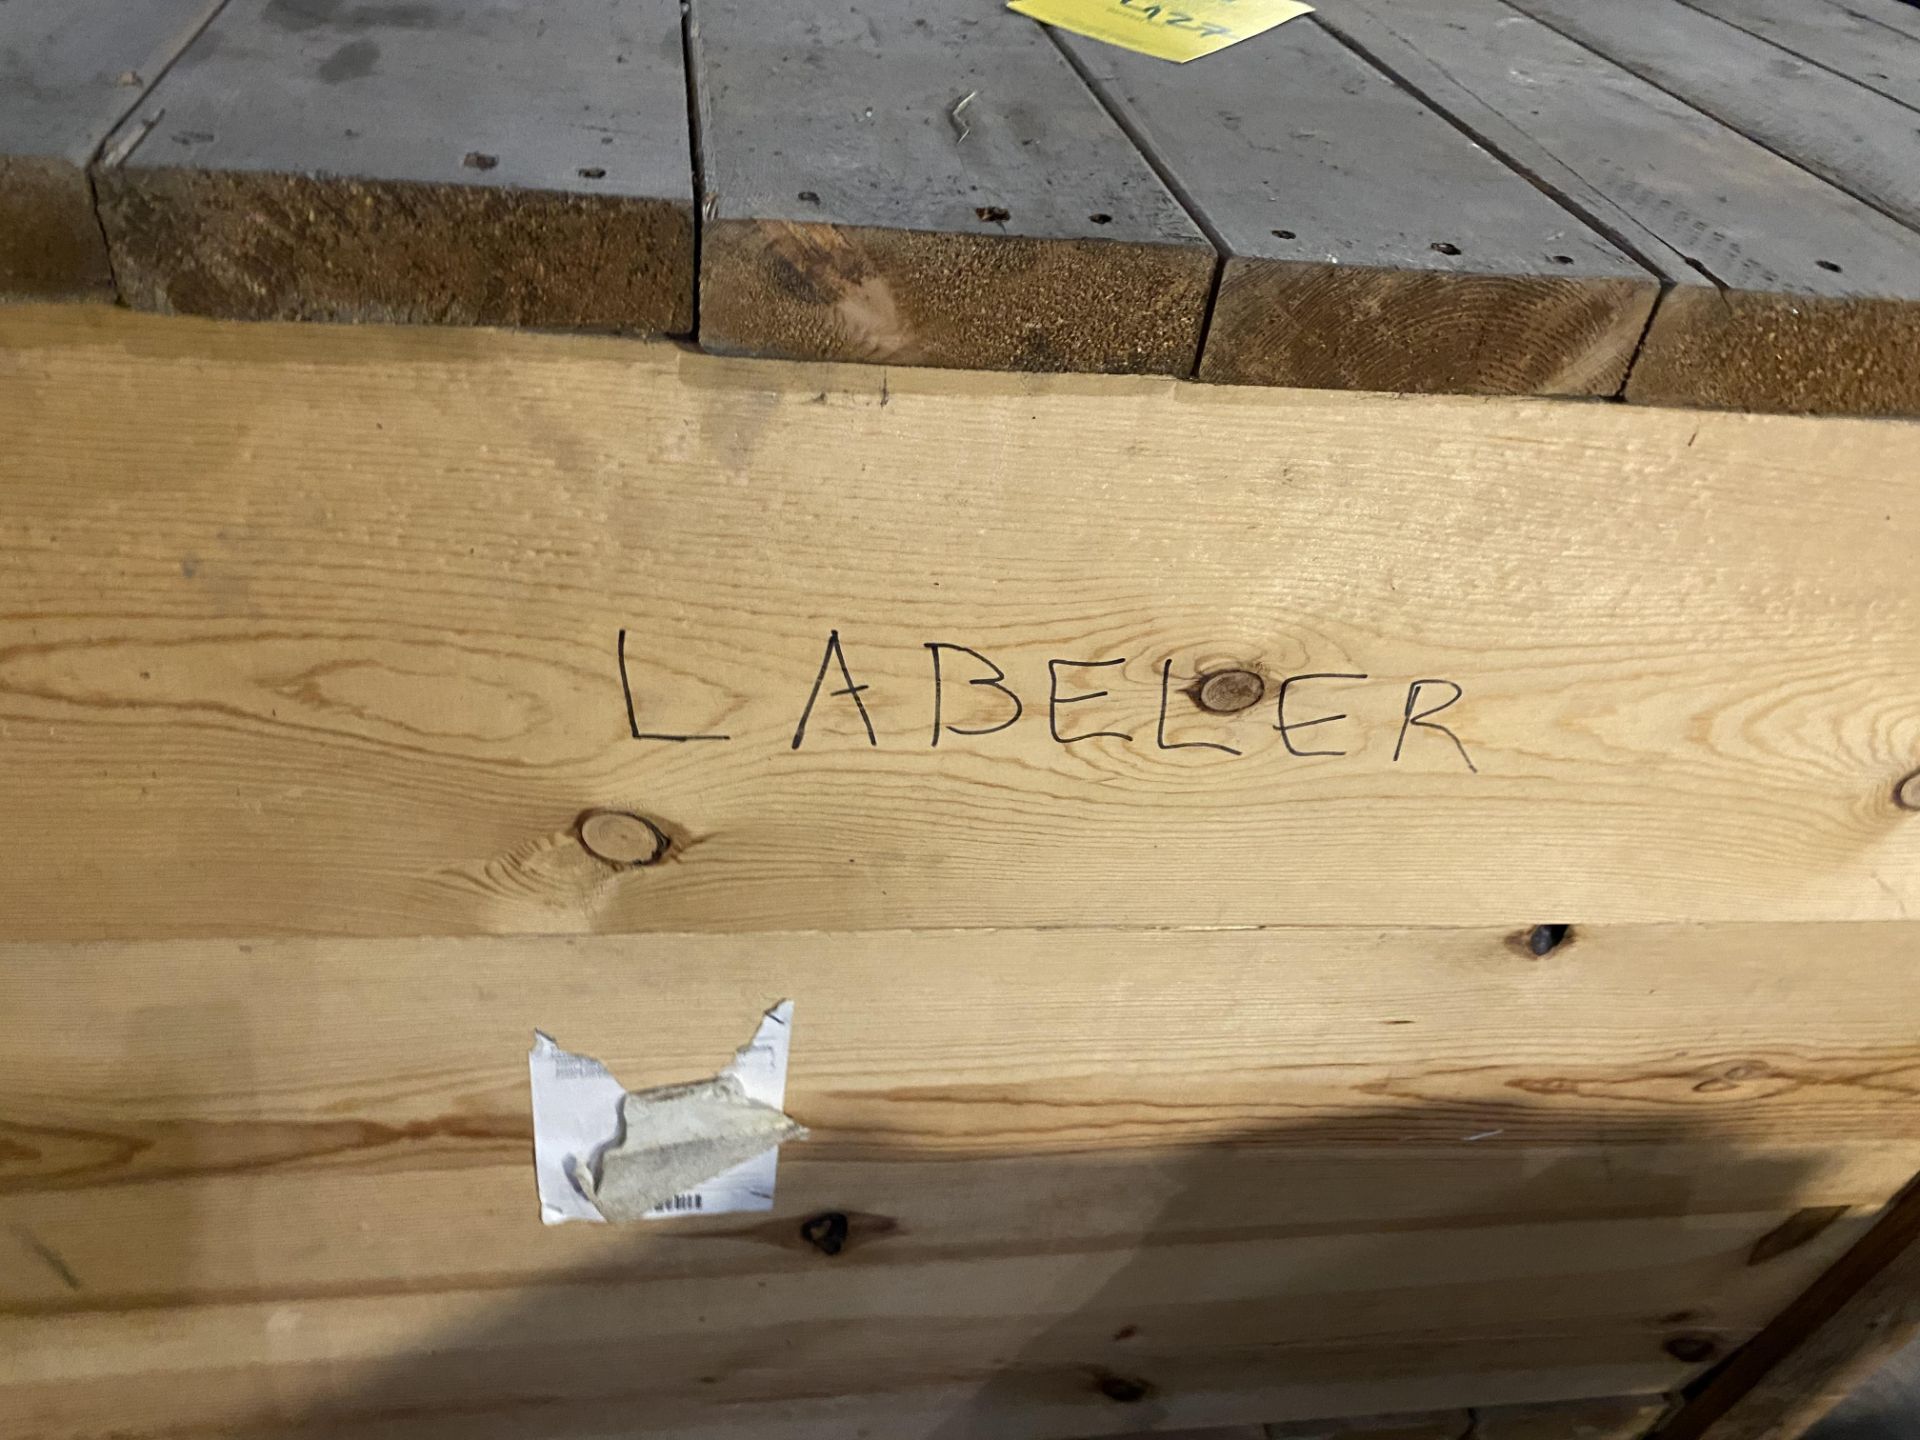 Labeler (Still in shipping crate), Located in Ottawa, OH